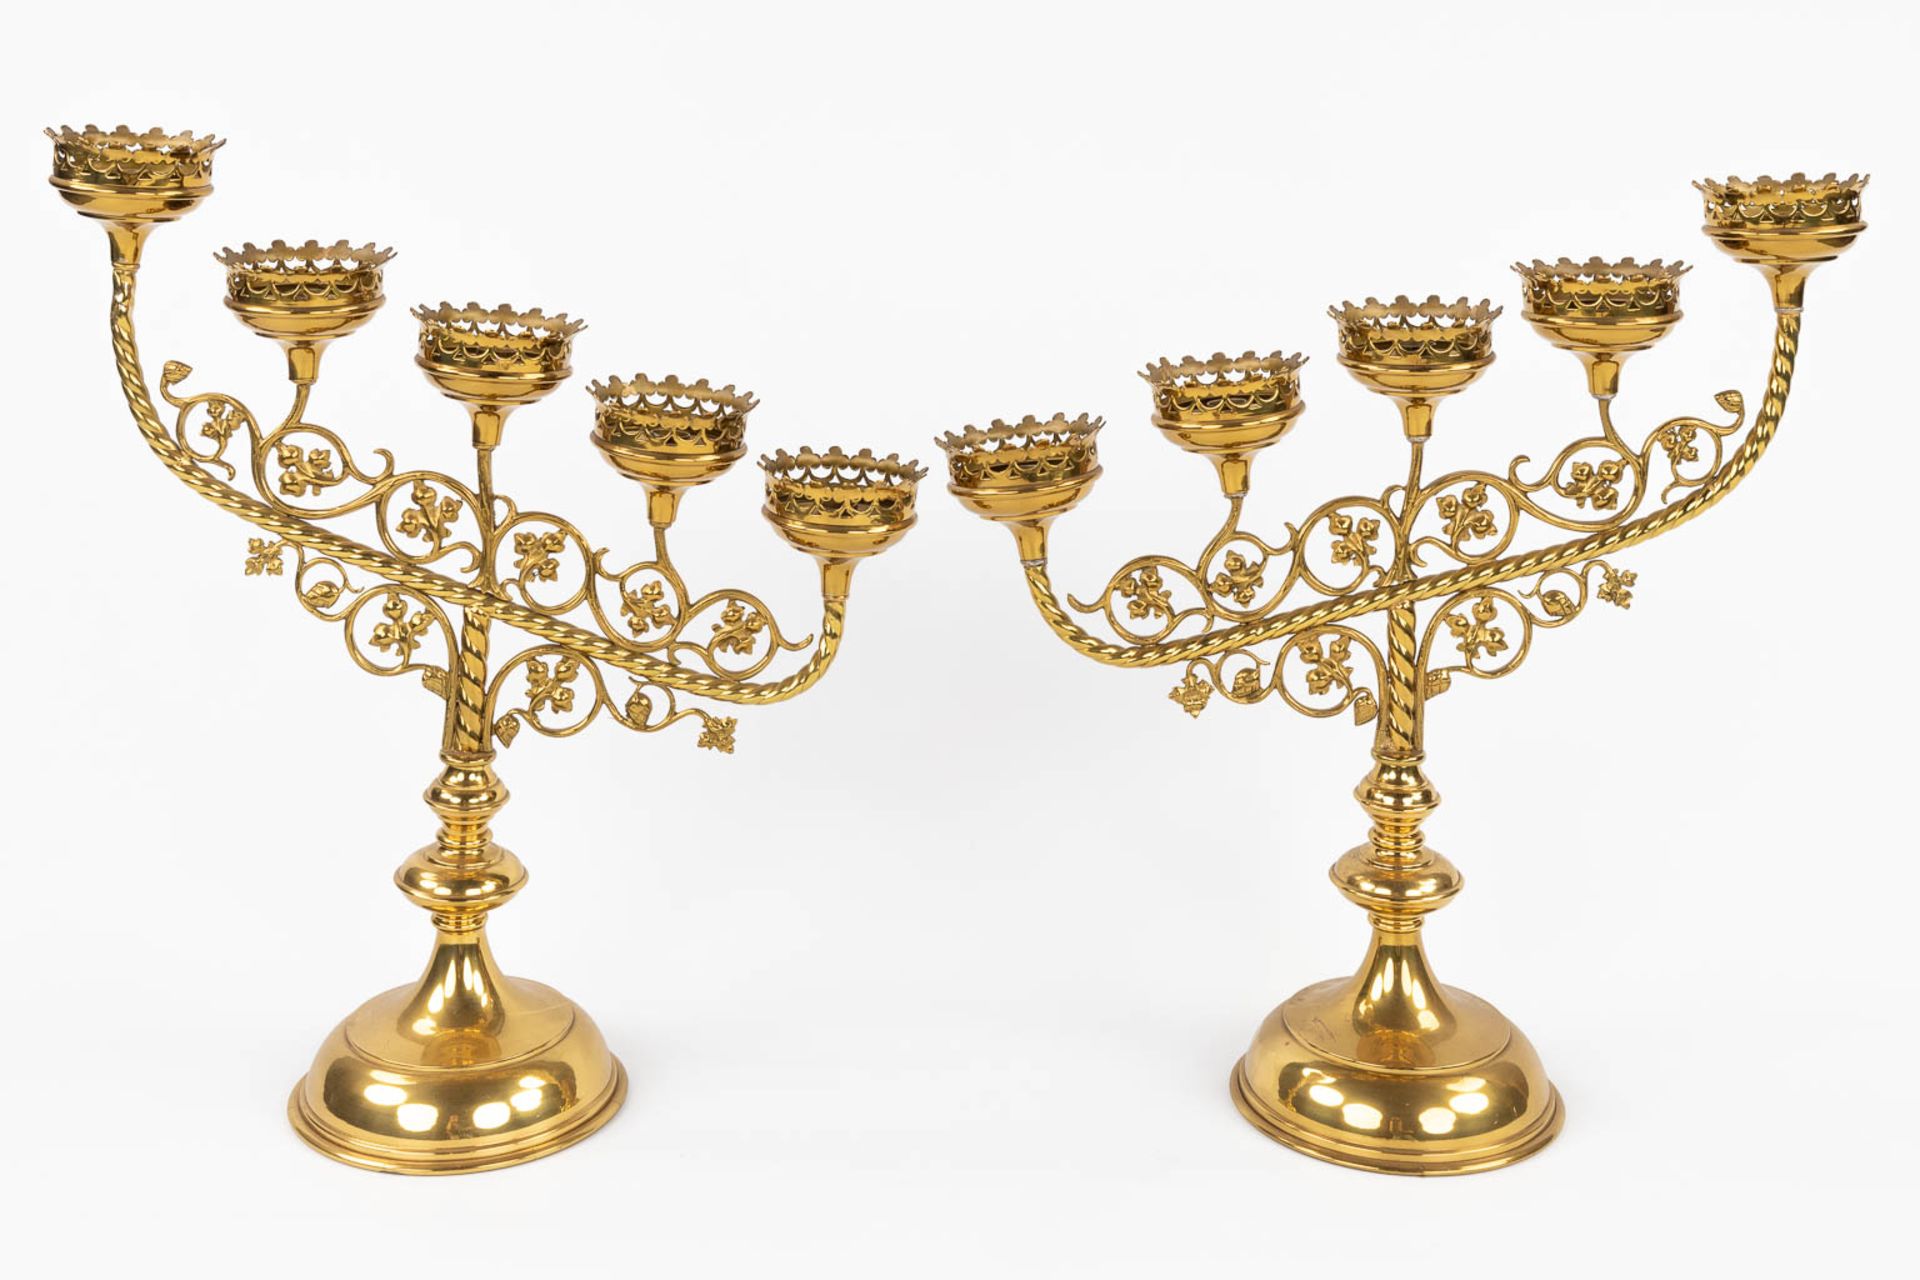 Four Church candlesticks, bronze in a gothic revival style. A pair and two singles. (D:18 x W:51 x H - Image 3 of 18